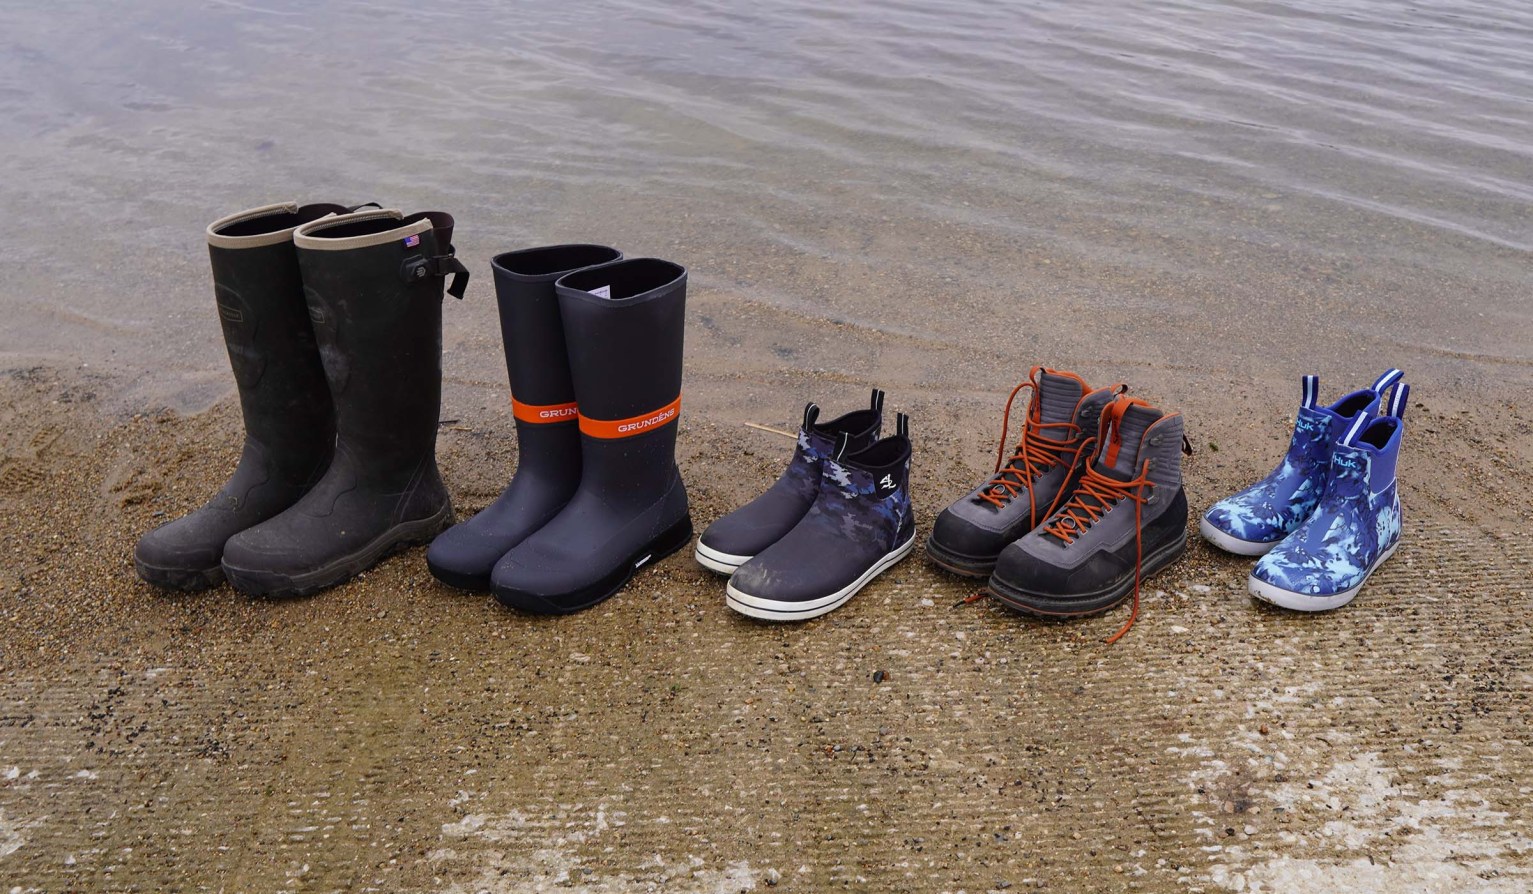 The best fishing boots